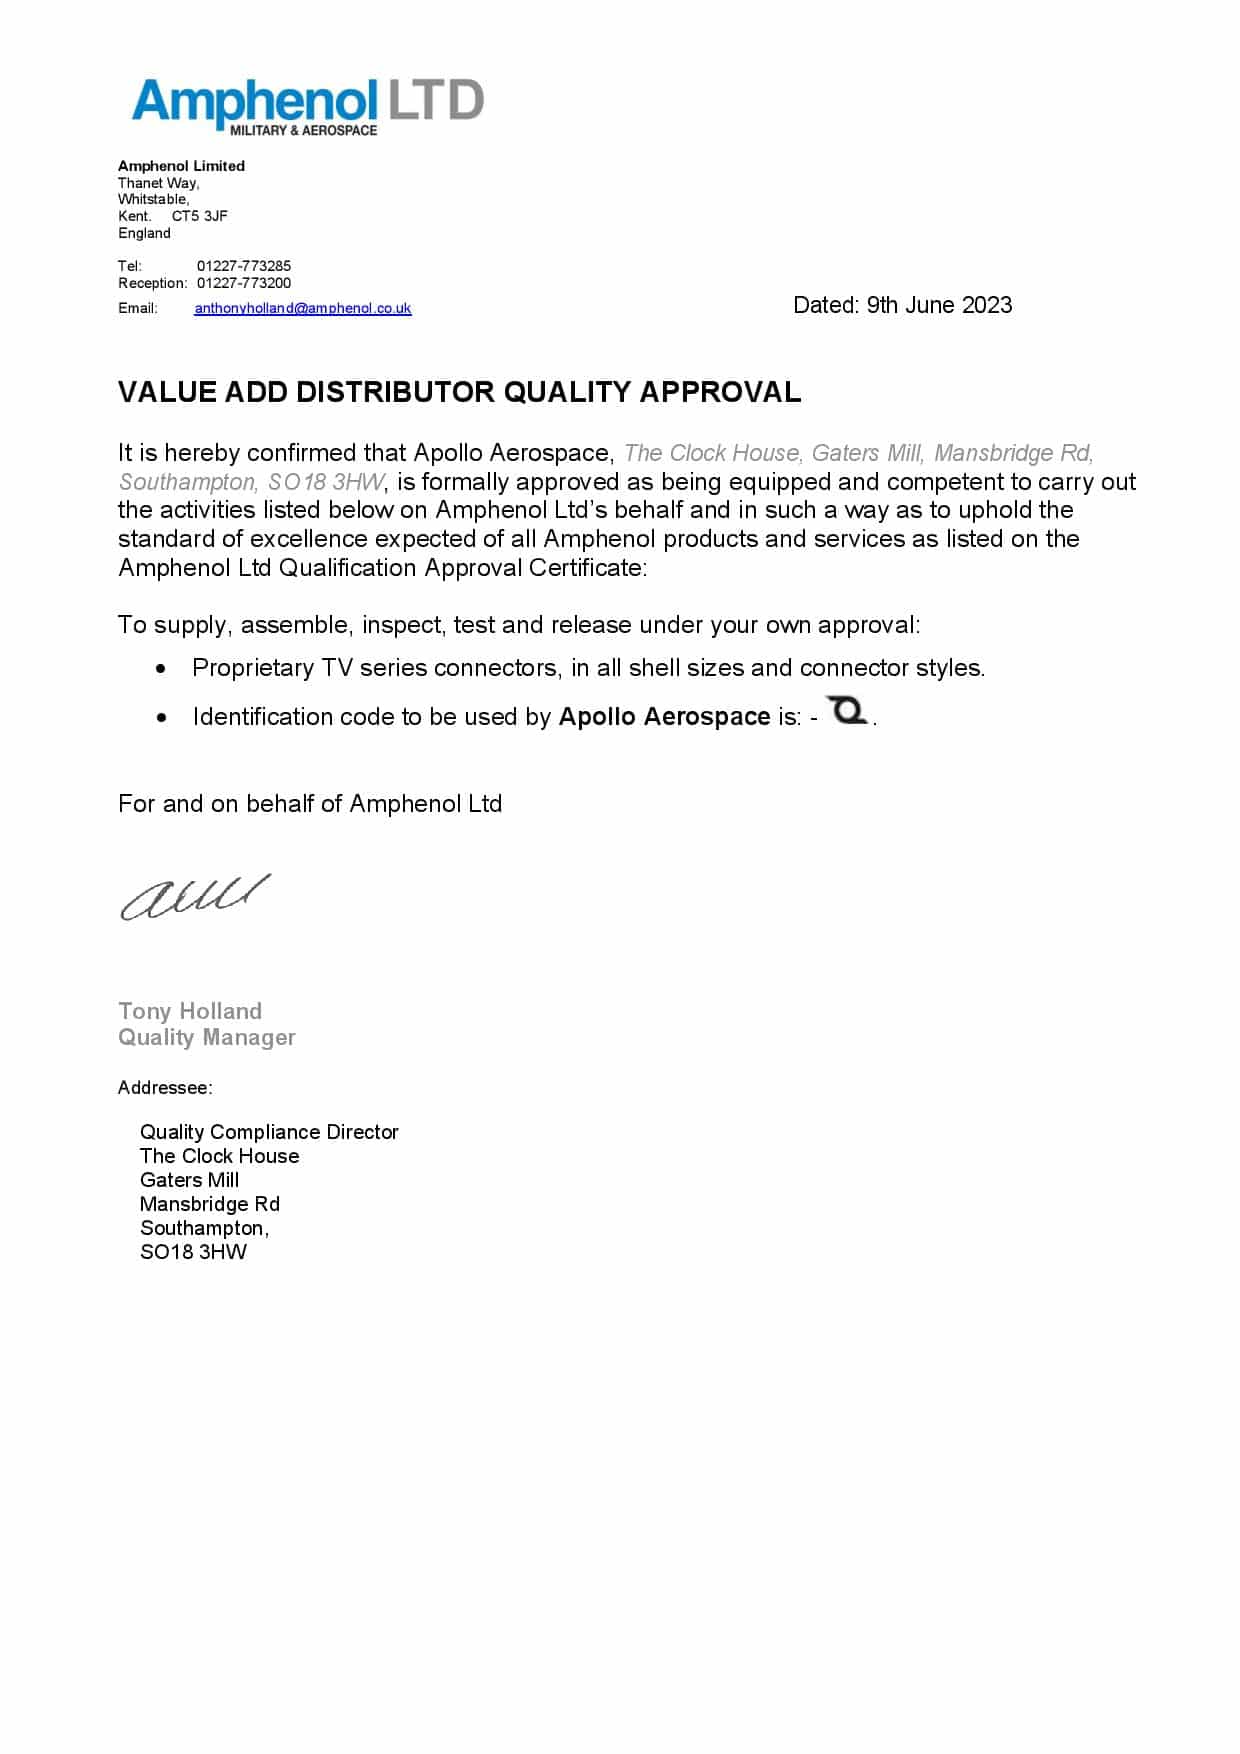 Amphenol VAD Approval Letter